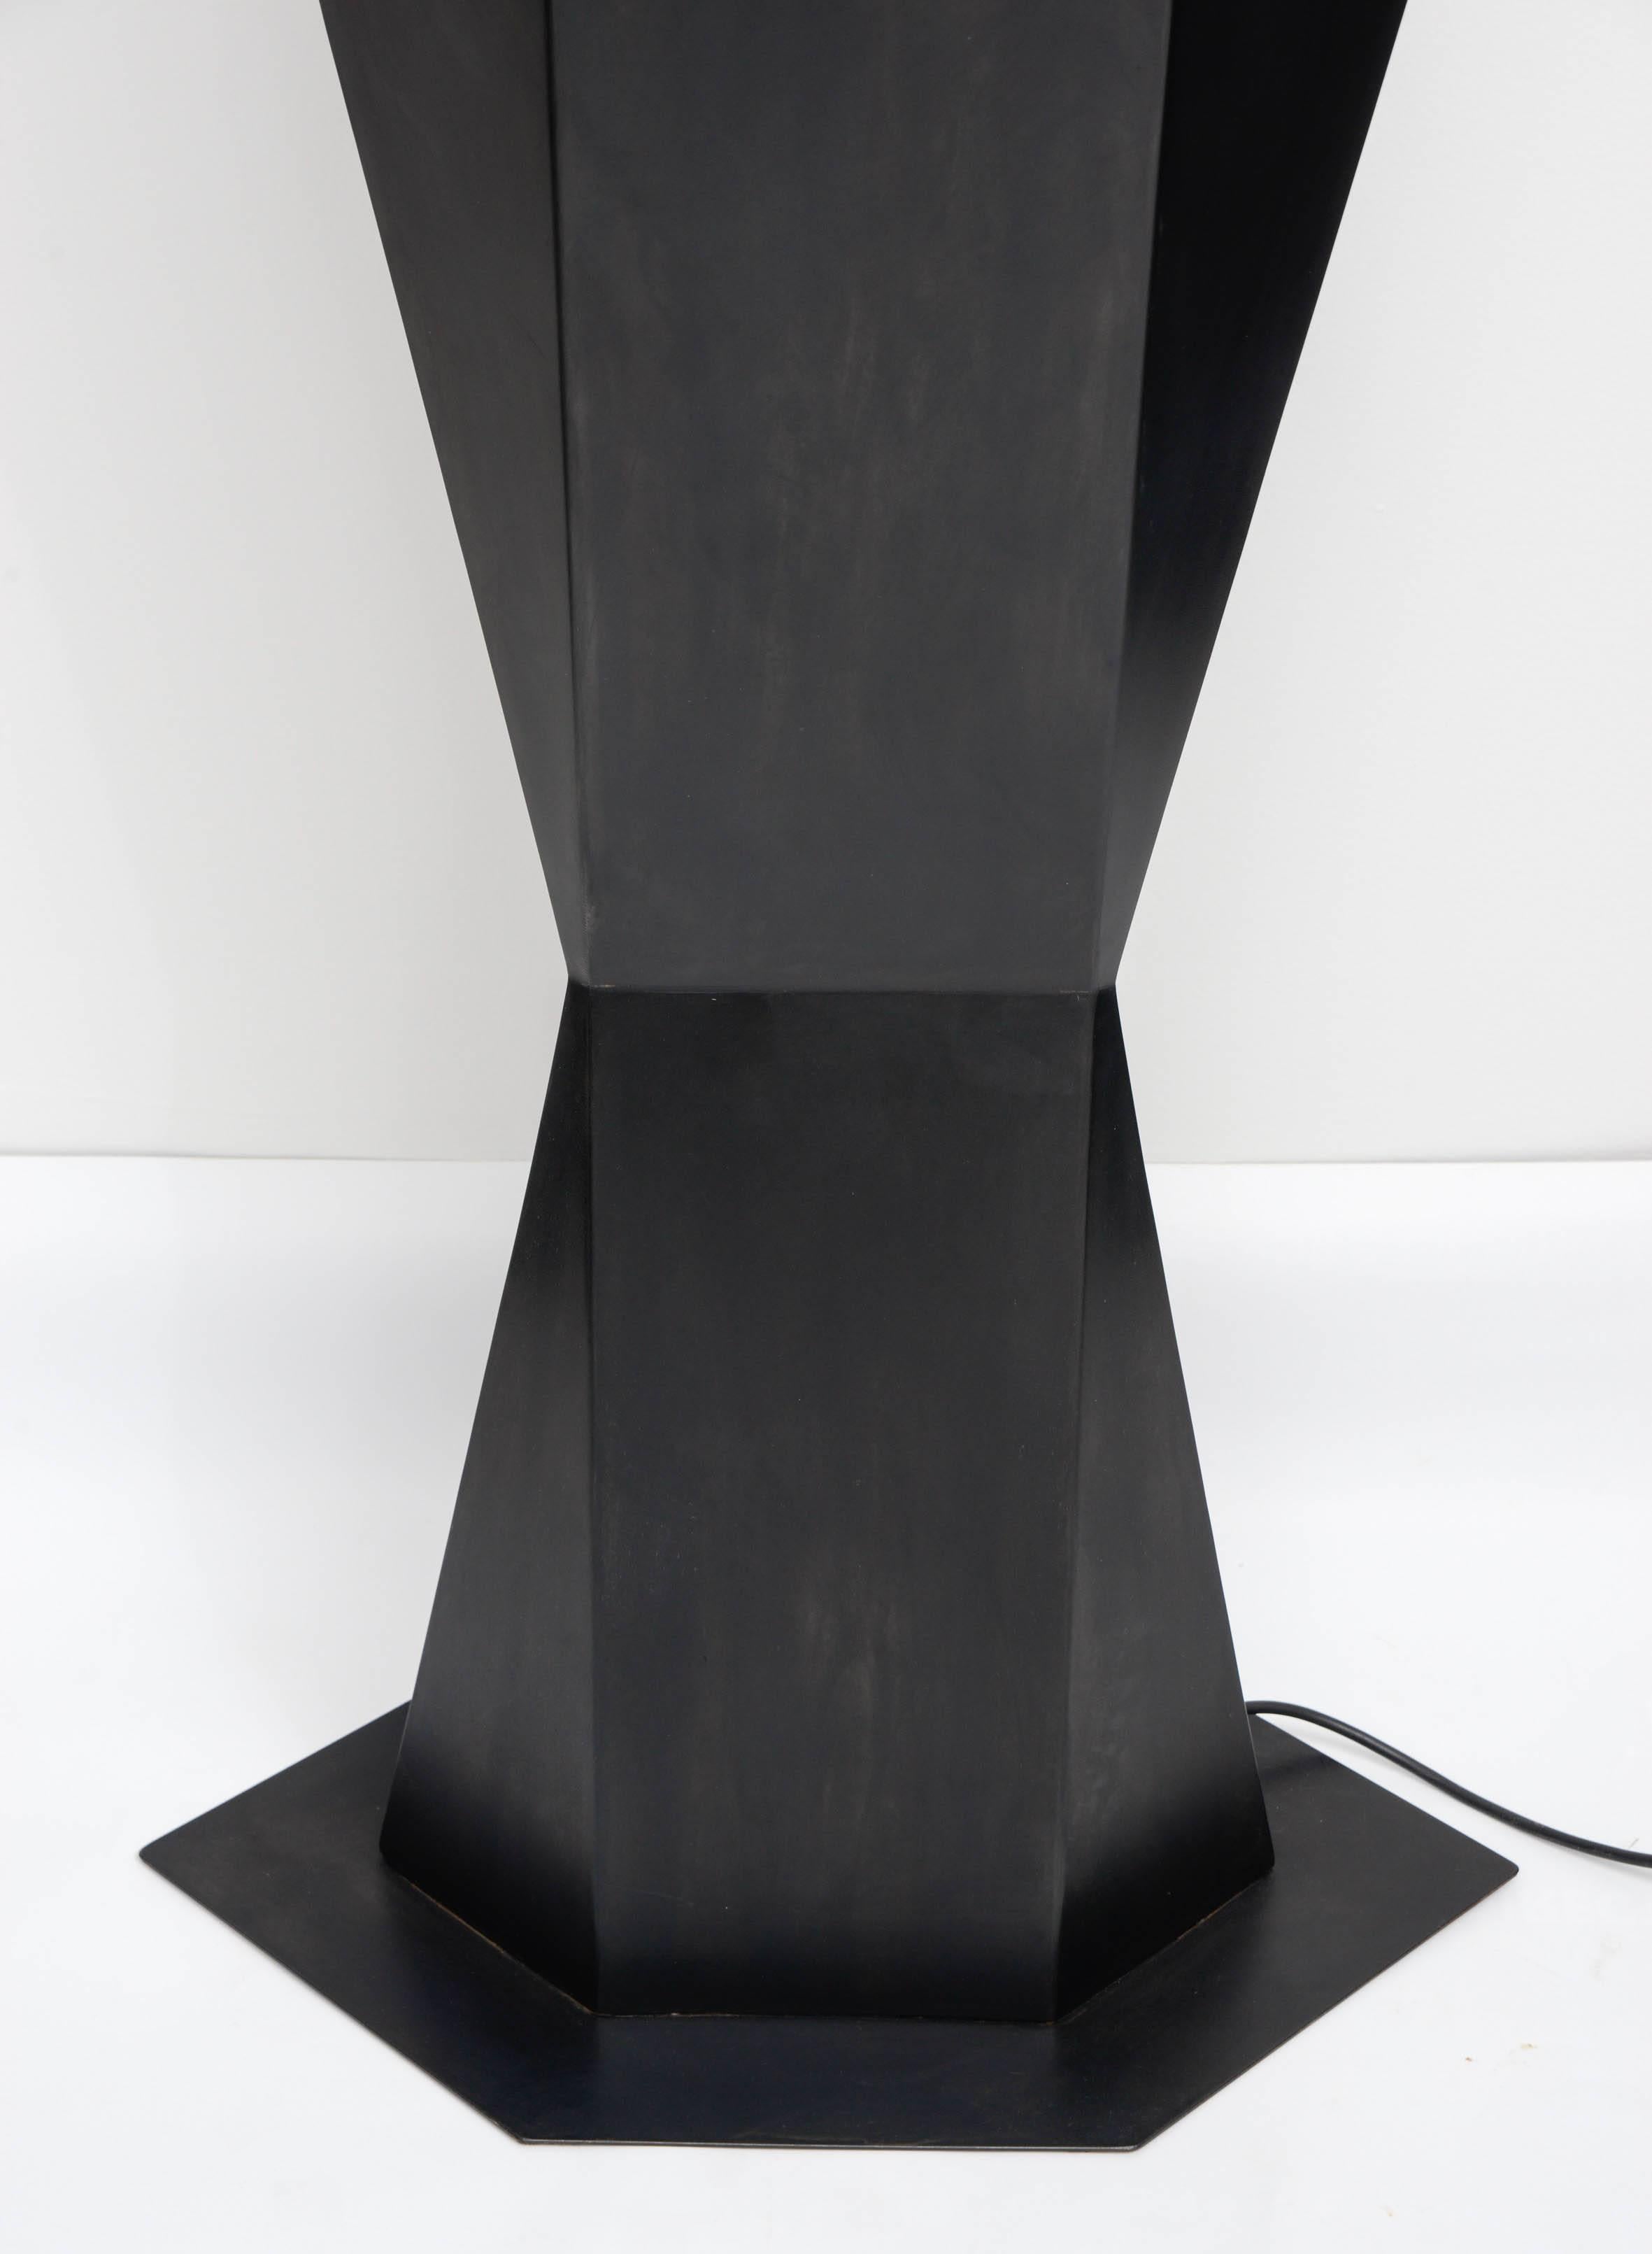 French Floor Lamp TOTEM by Stephane Ducatteau for Fortuna For Sale